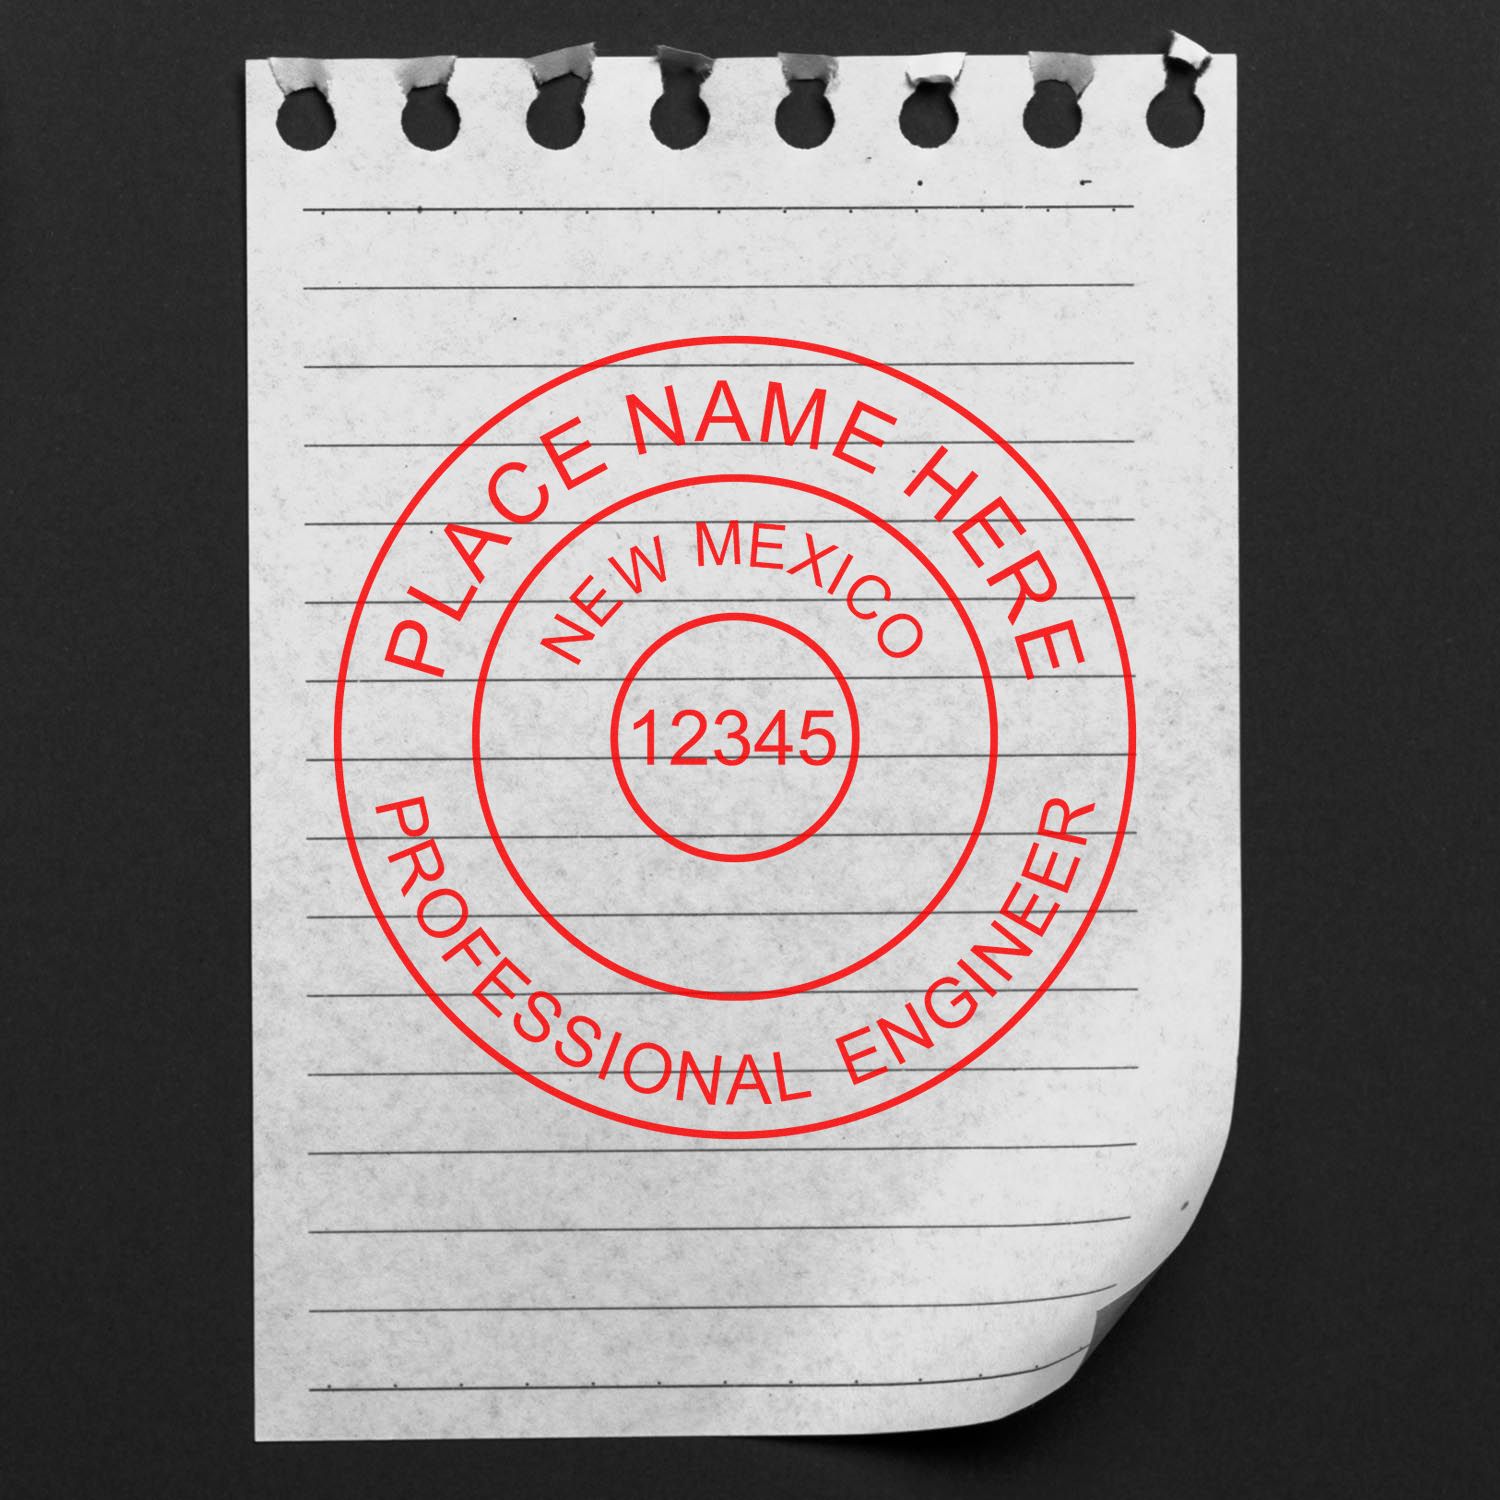 A lifestyle photo showing a stamped image of the New Mexico Professional Engineer Seal Stamp on a piece of paper